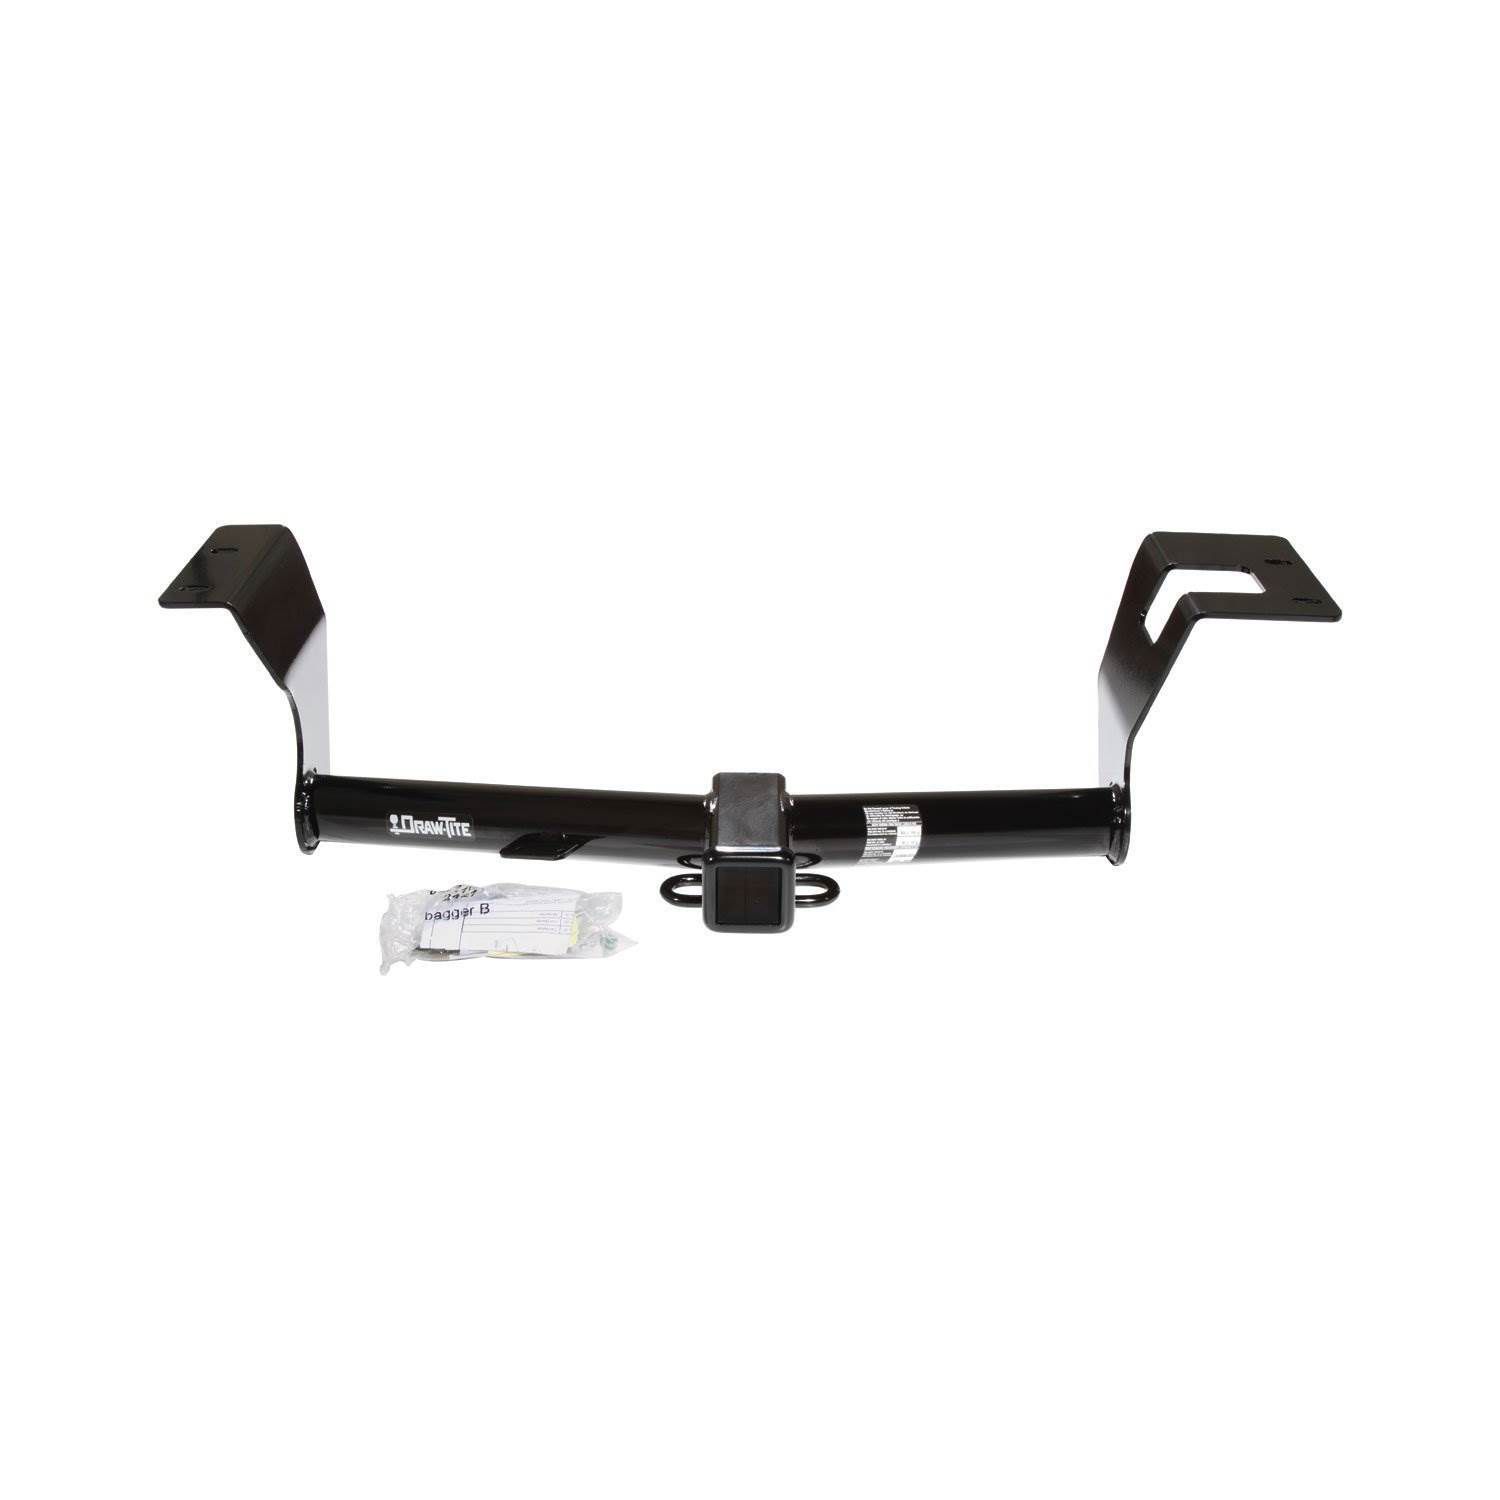 Image for Draw-Tite Draw Tite 75547 Max Frame Class III 4500 Pound 2 Inch Receiver Trailer Hitch at Kohl's.